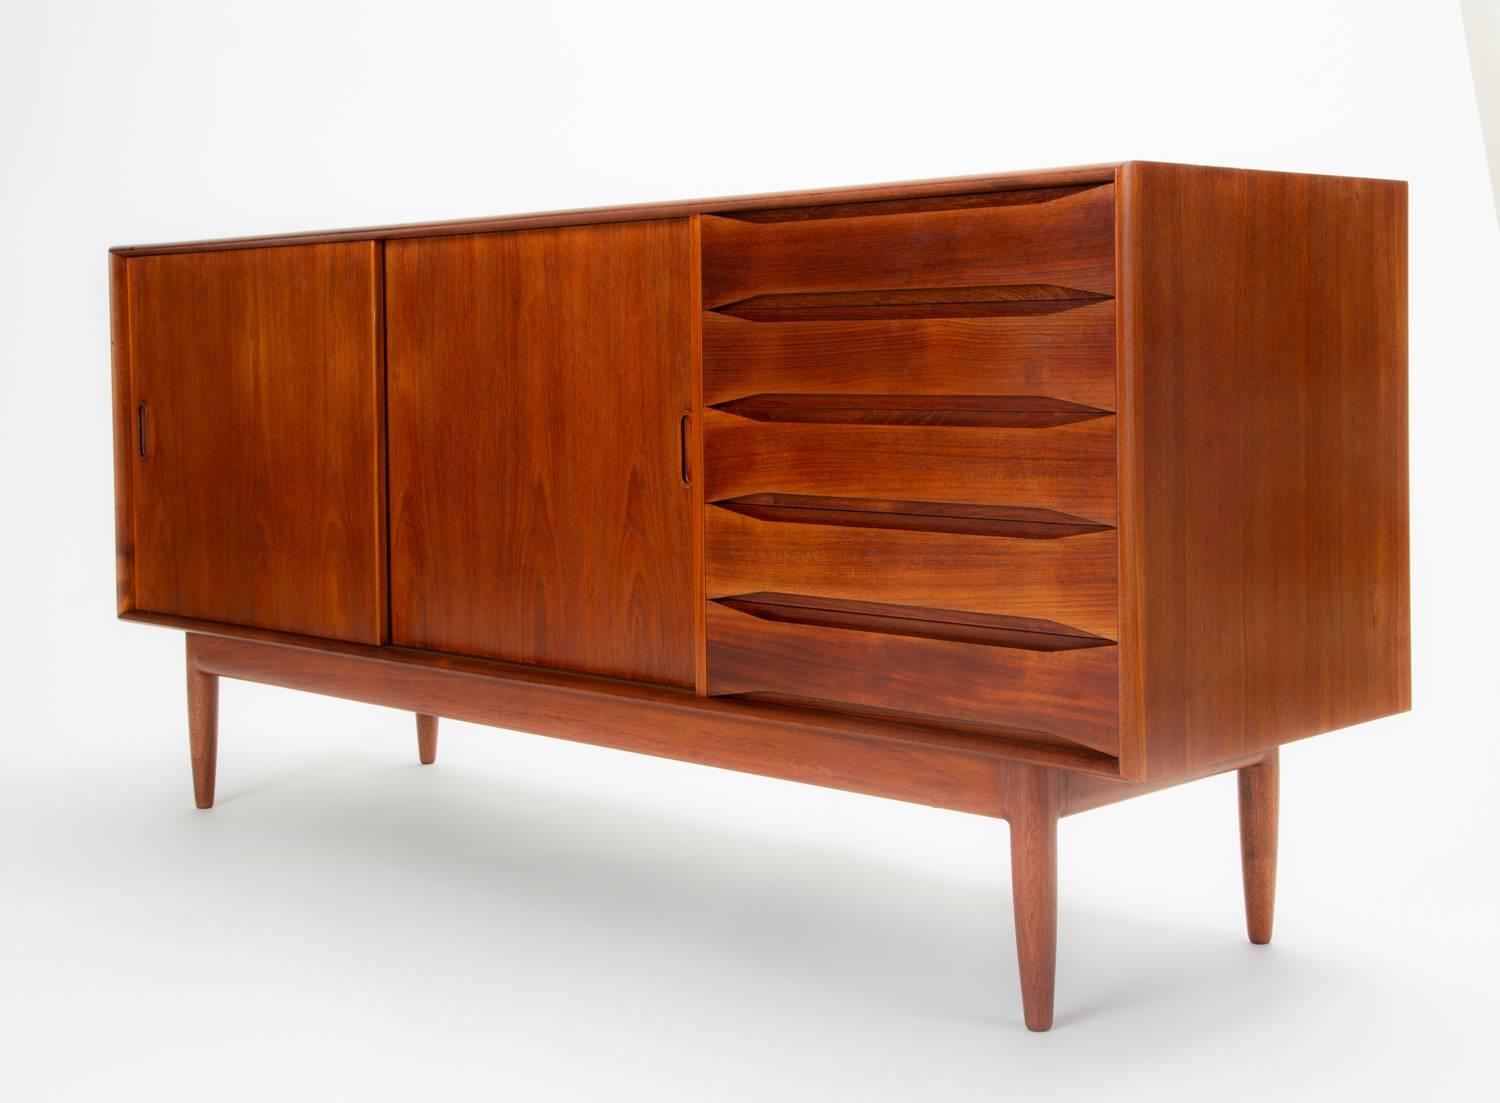 Danish Modern Teak Credenza with Bowtie Drawers by Johannes Aasbjerg 3